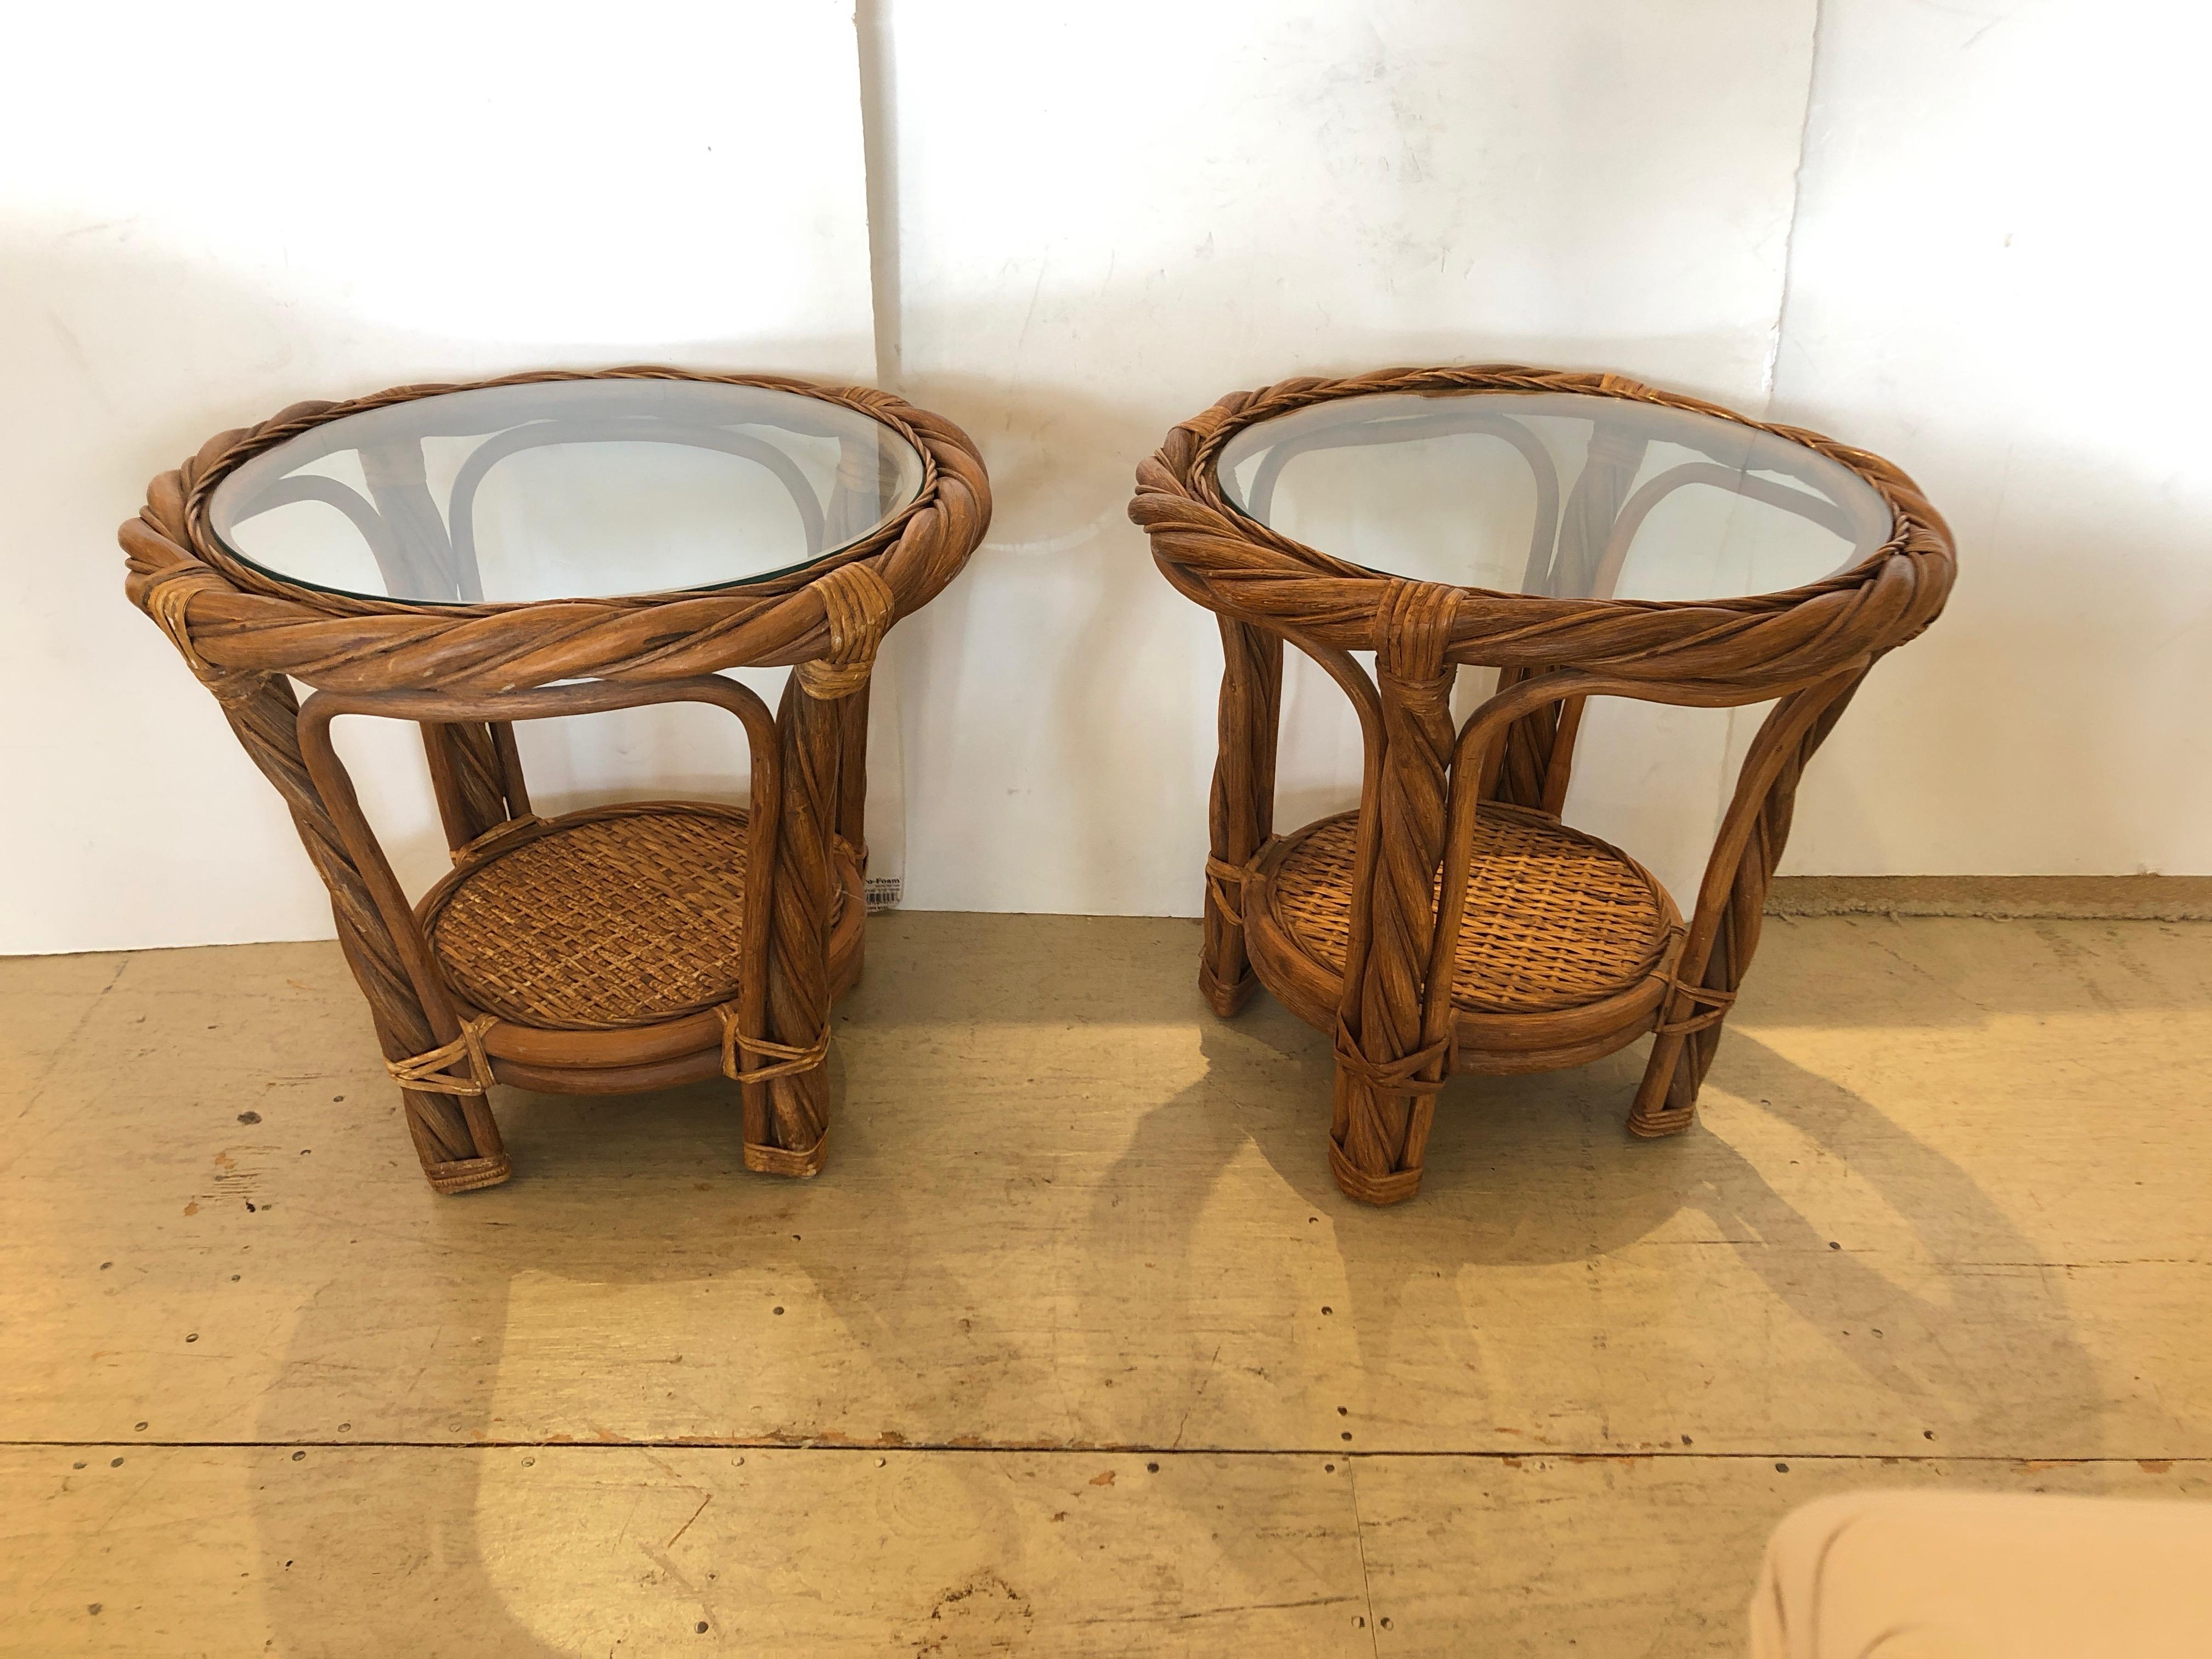 Two handsome round side or end tables made of rattan, bamboo and wicker, having two tiers and inset glass tops. Solid sturdy construction and very classy.